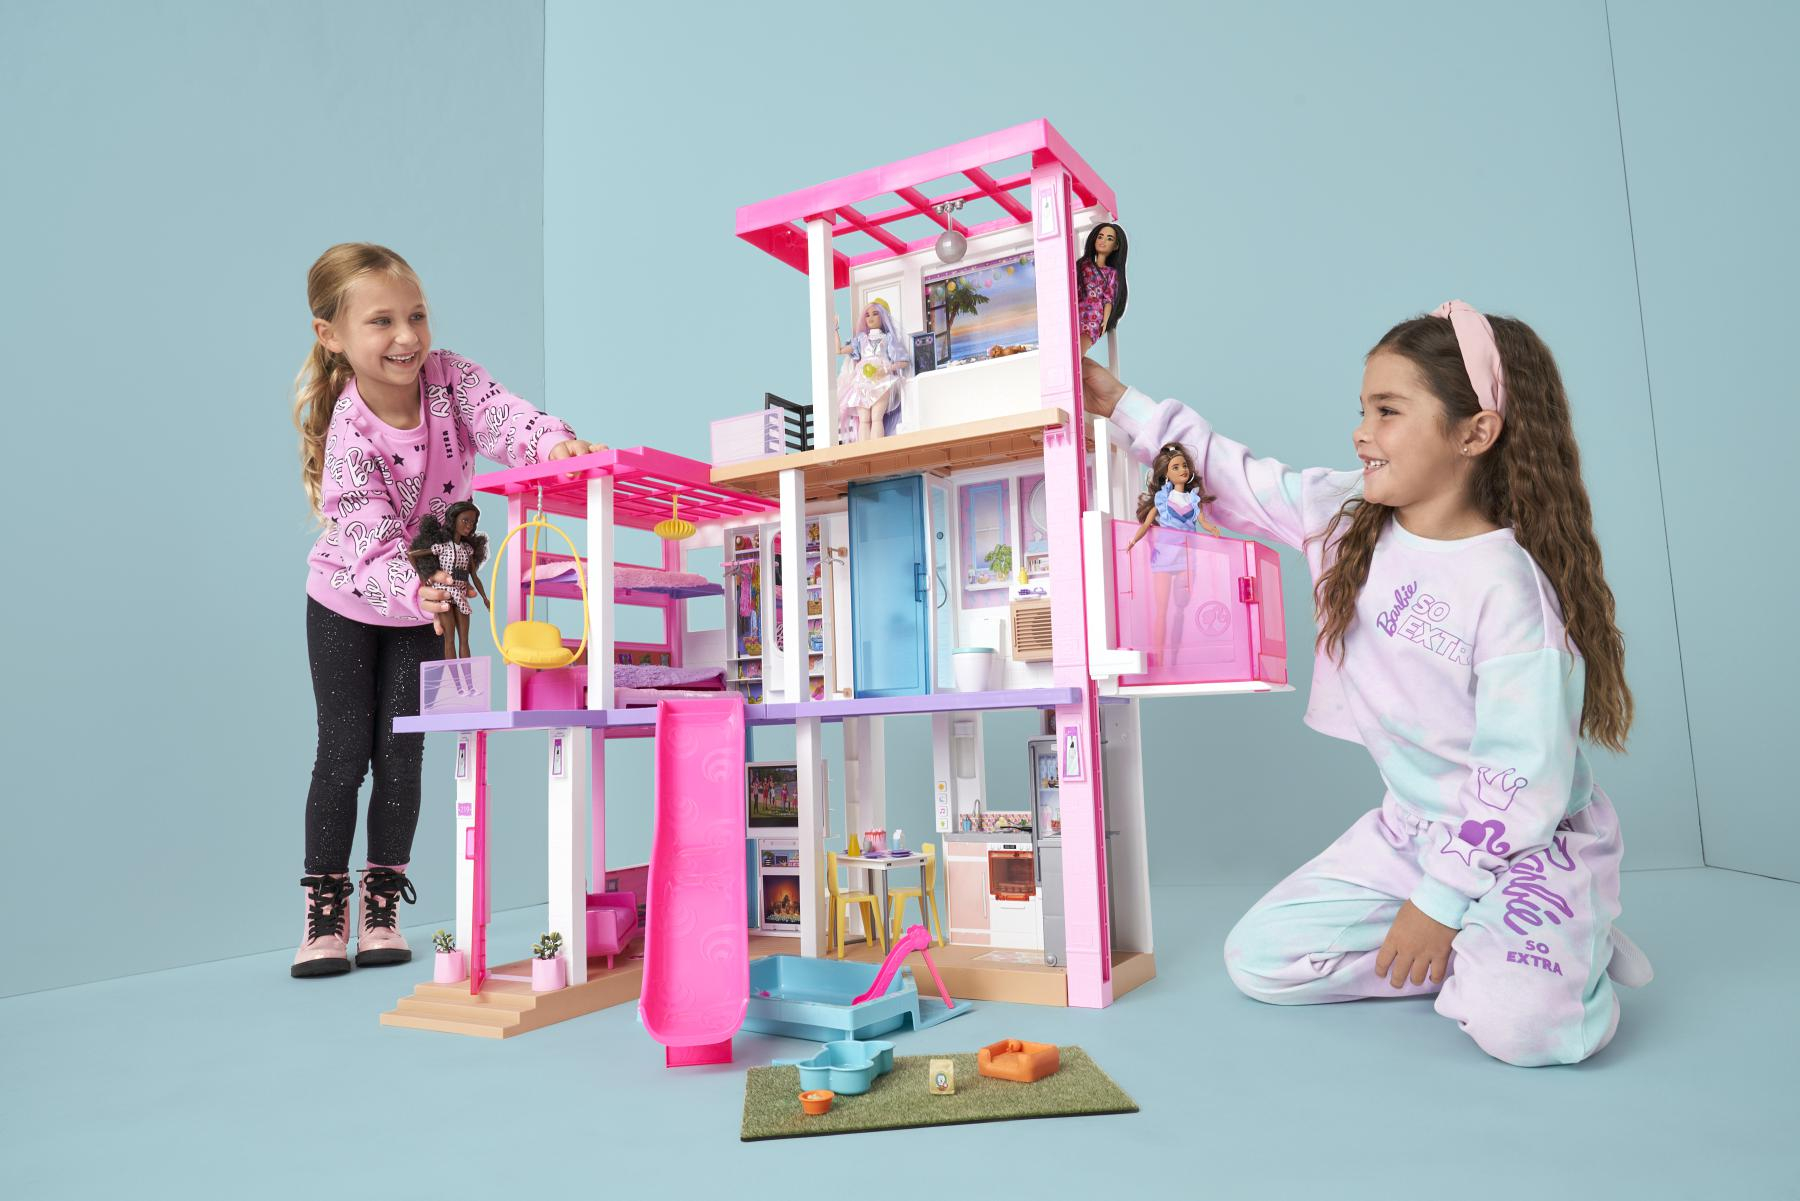 Best-selling toys of all time from Lego to Barbie and Buzz